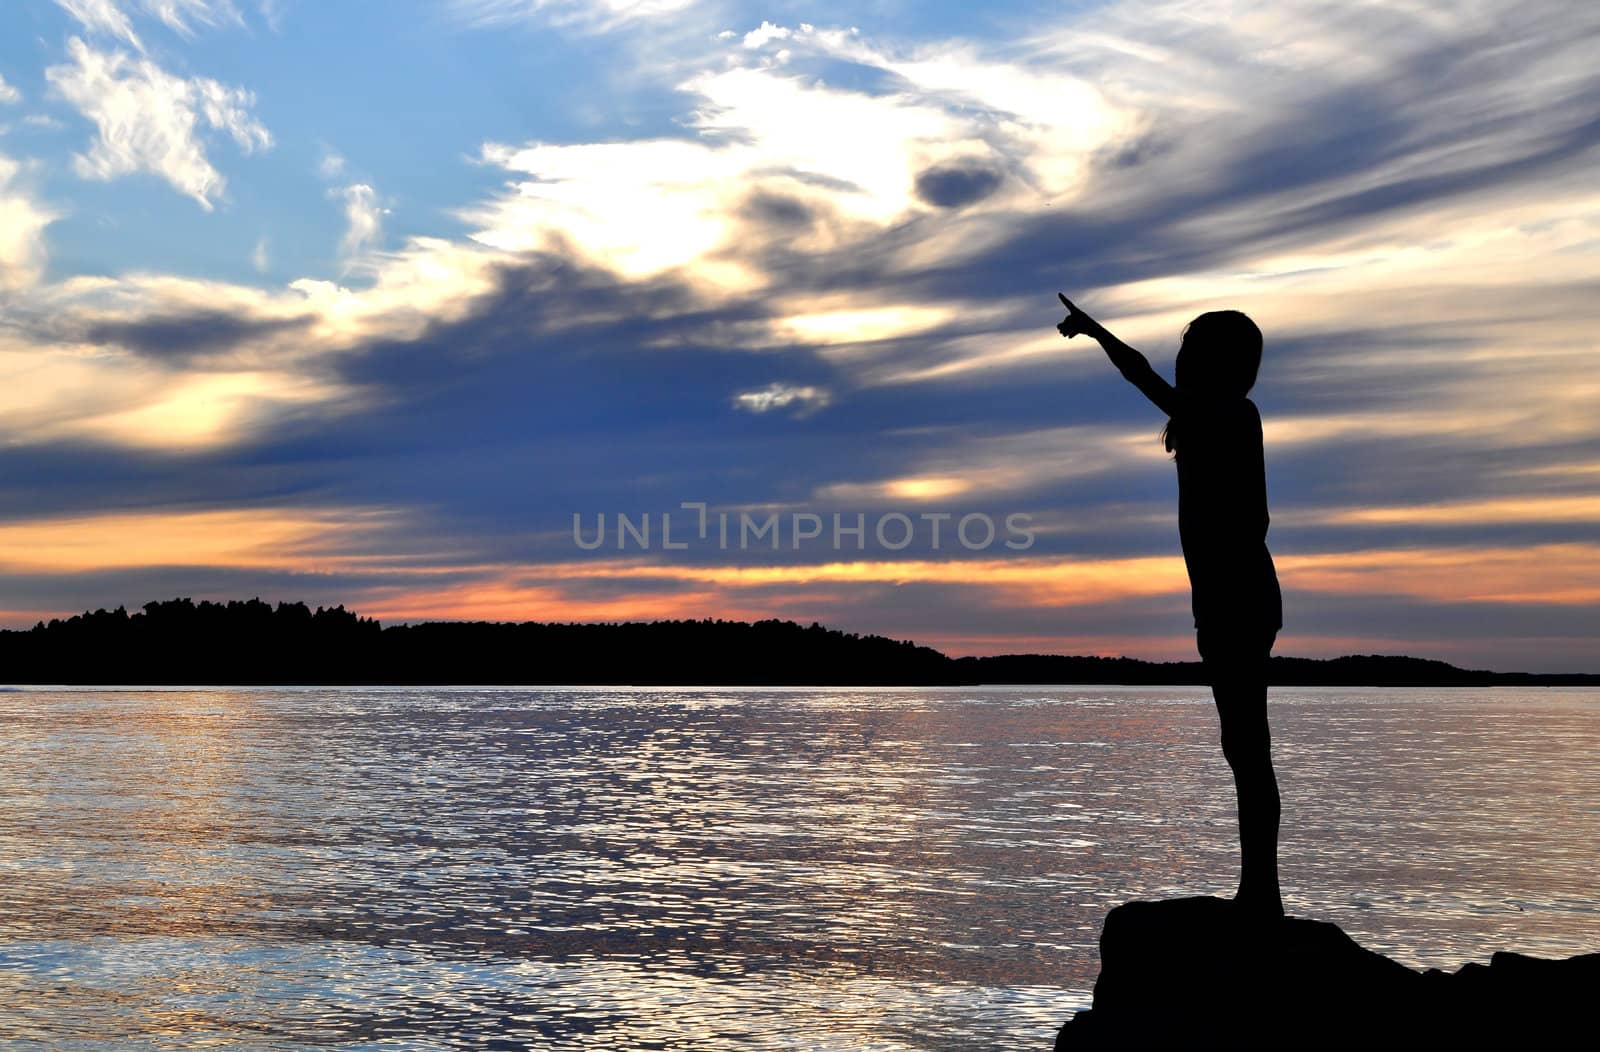 The silhouette of a young girl pointing to sky in the archipelago of Stockholm.